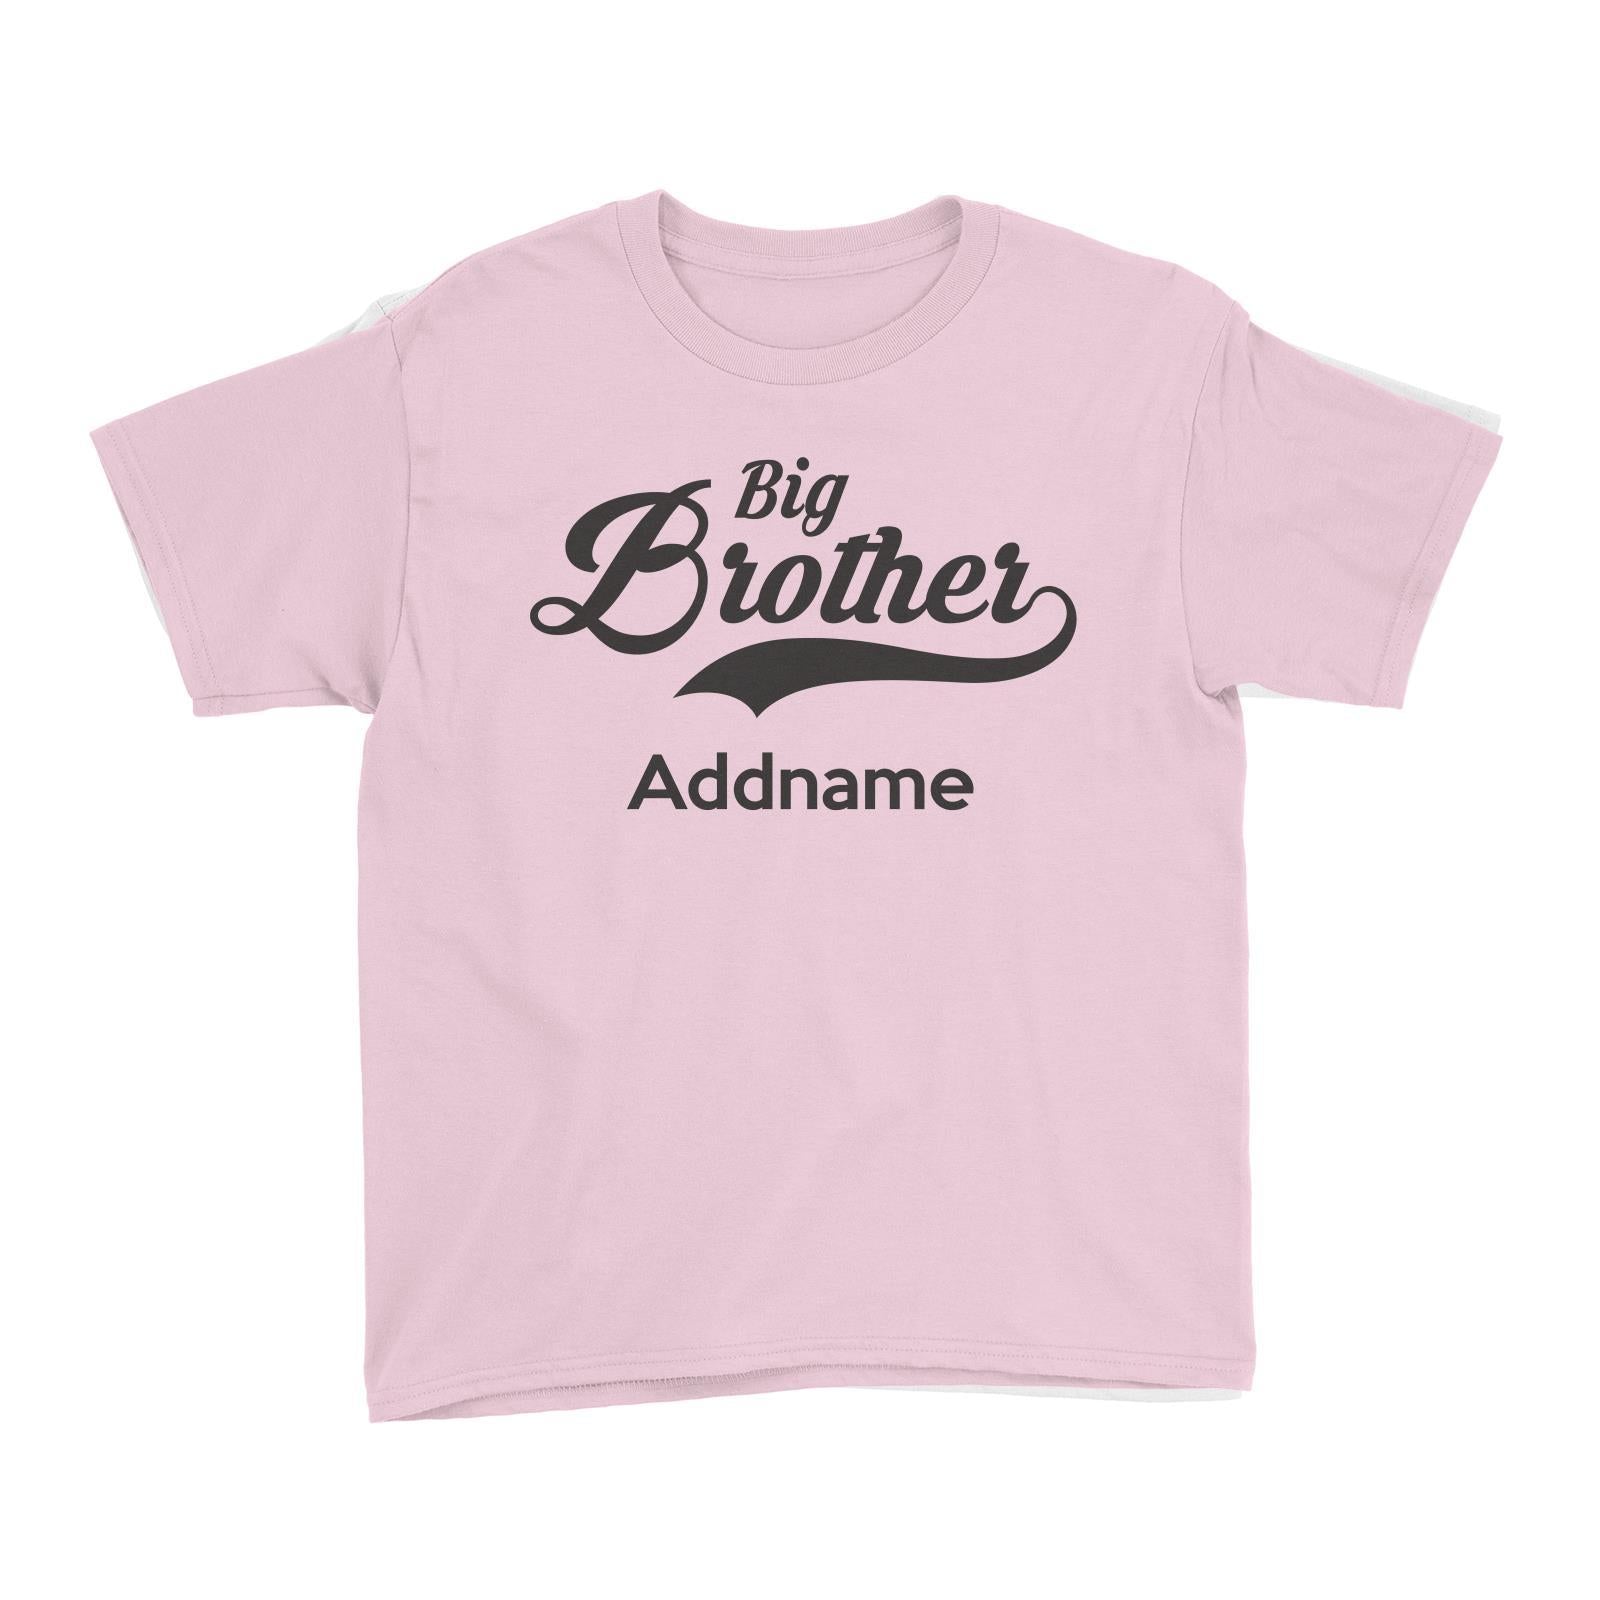 Retro Big Brother Addname Kid's T-Shirt  Matching Family Personalizable Designs